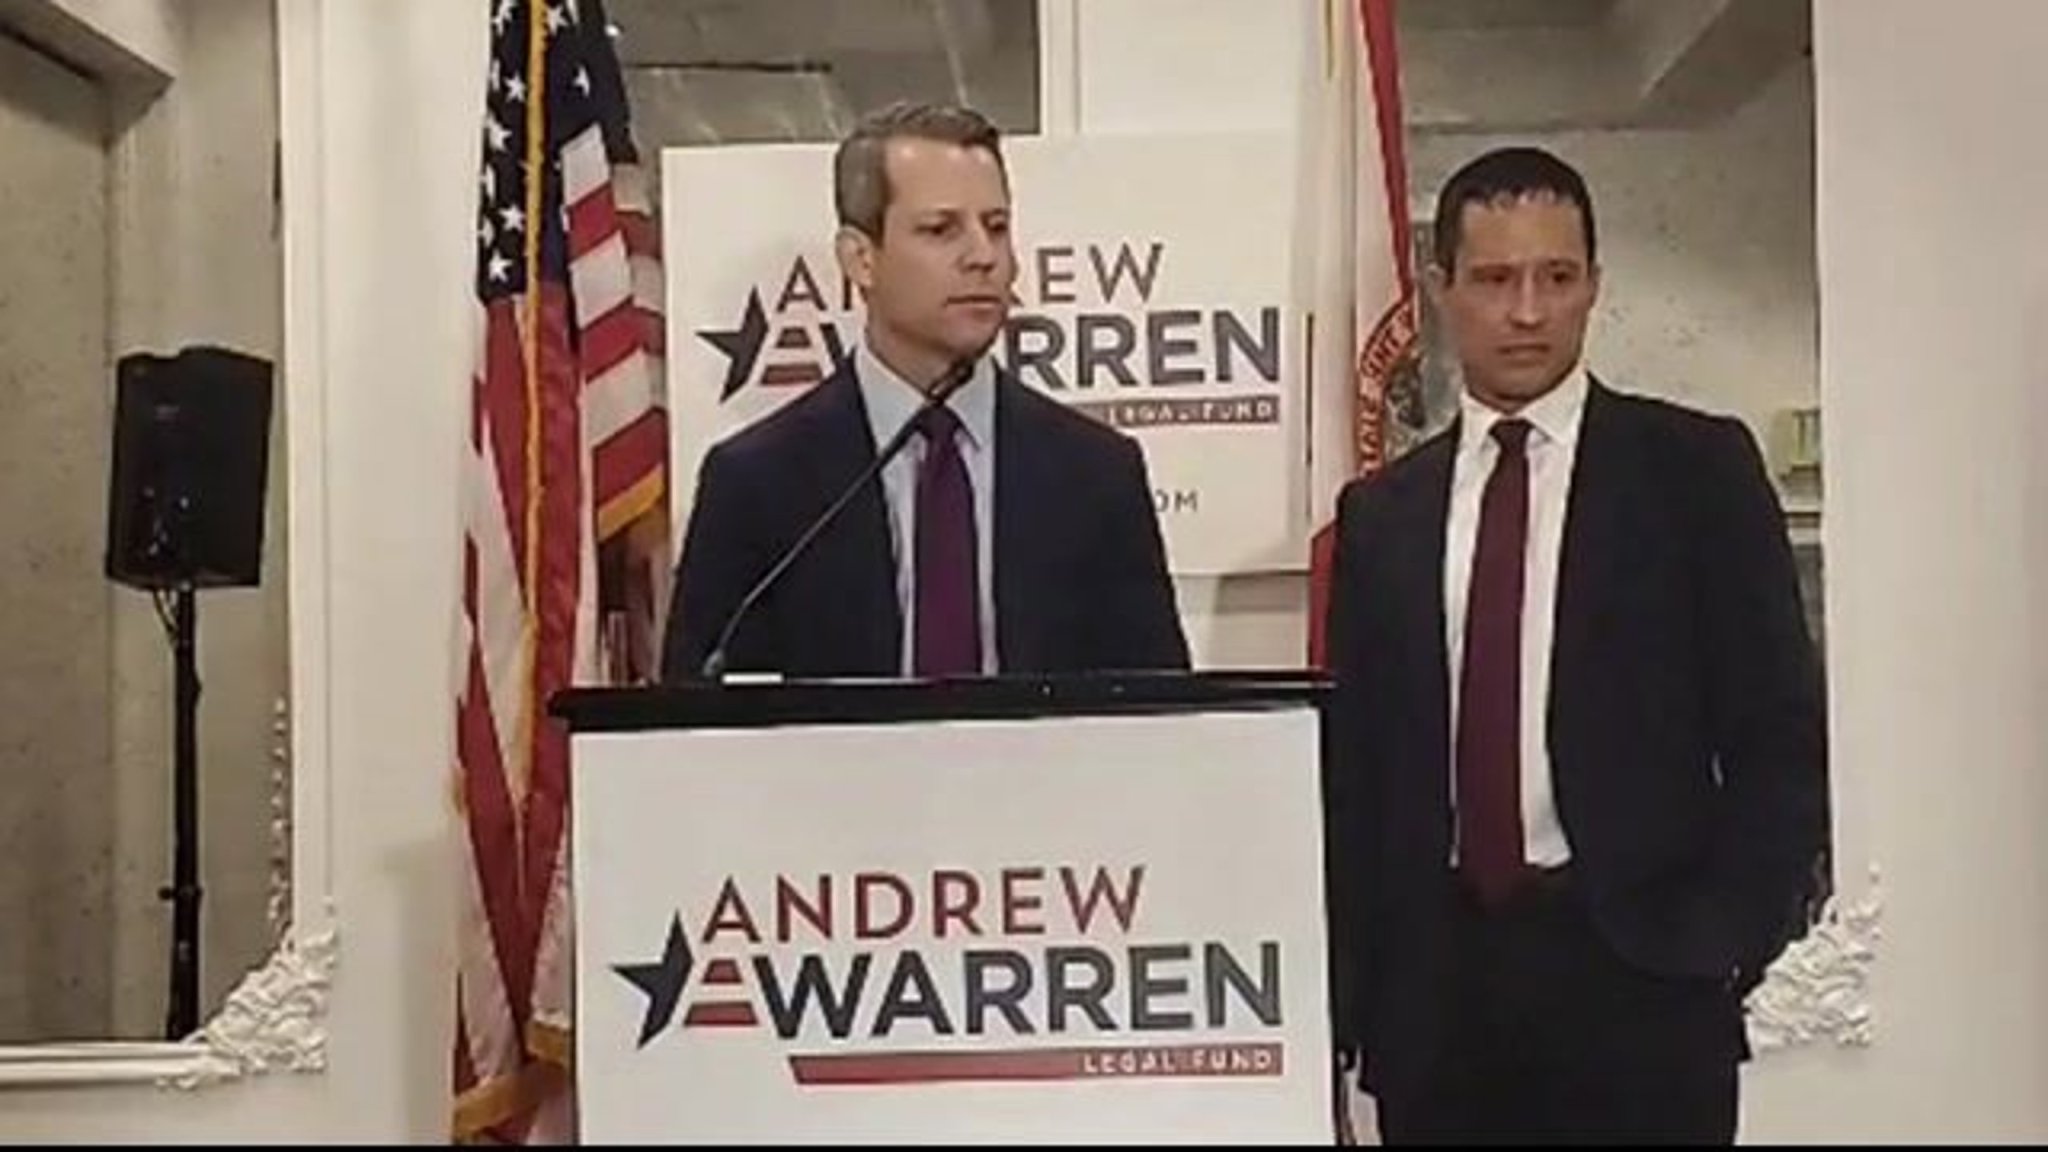 State Attorney Andrew Warren: “Governor [DeSantis] was elected in a fair and free election once, just like I was twice.”